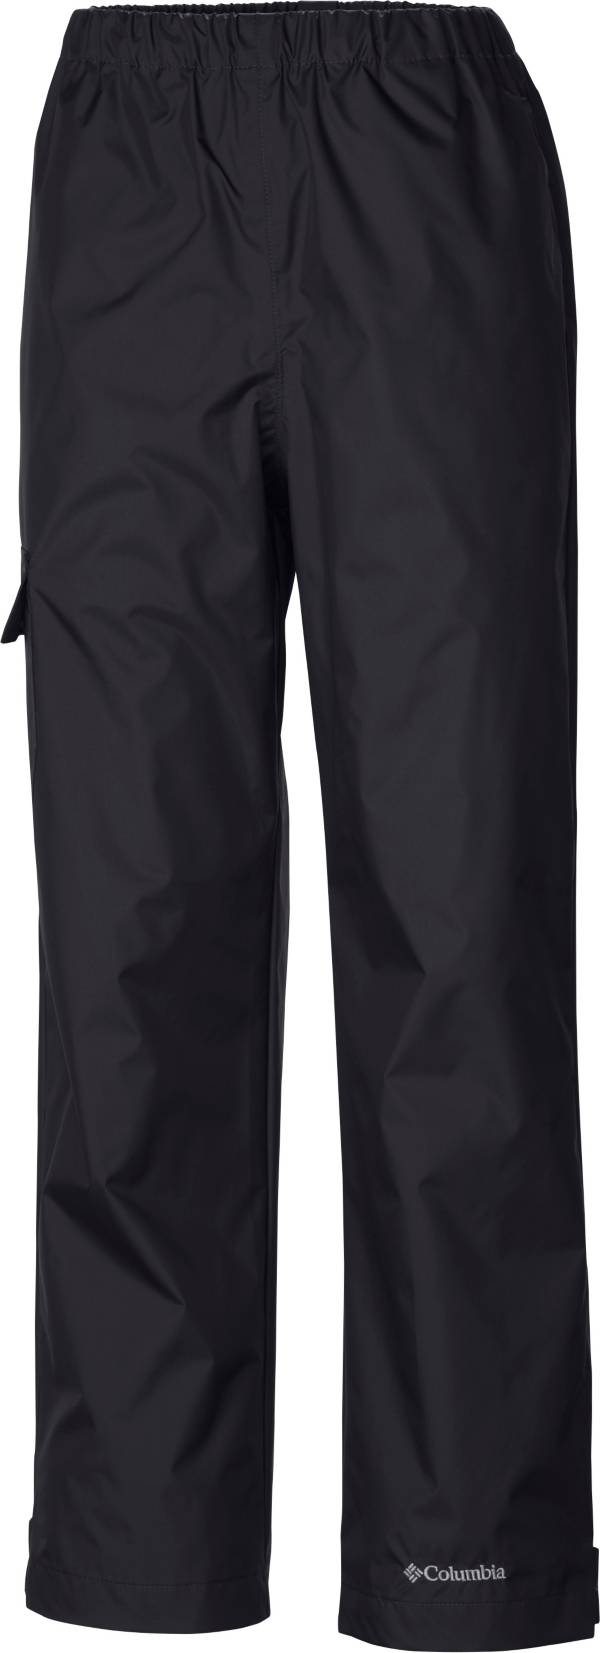 Columbia Youth Cypress Brook II Shell Pants | Dick's Sporting Goods